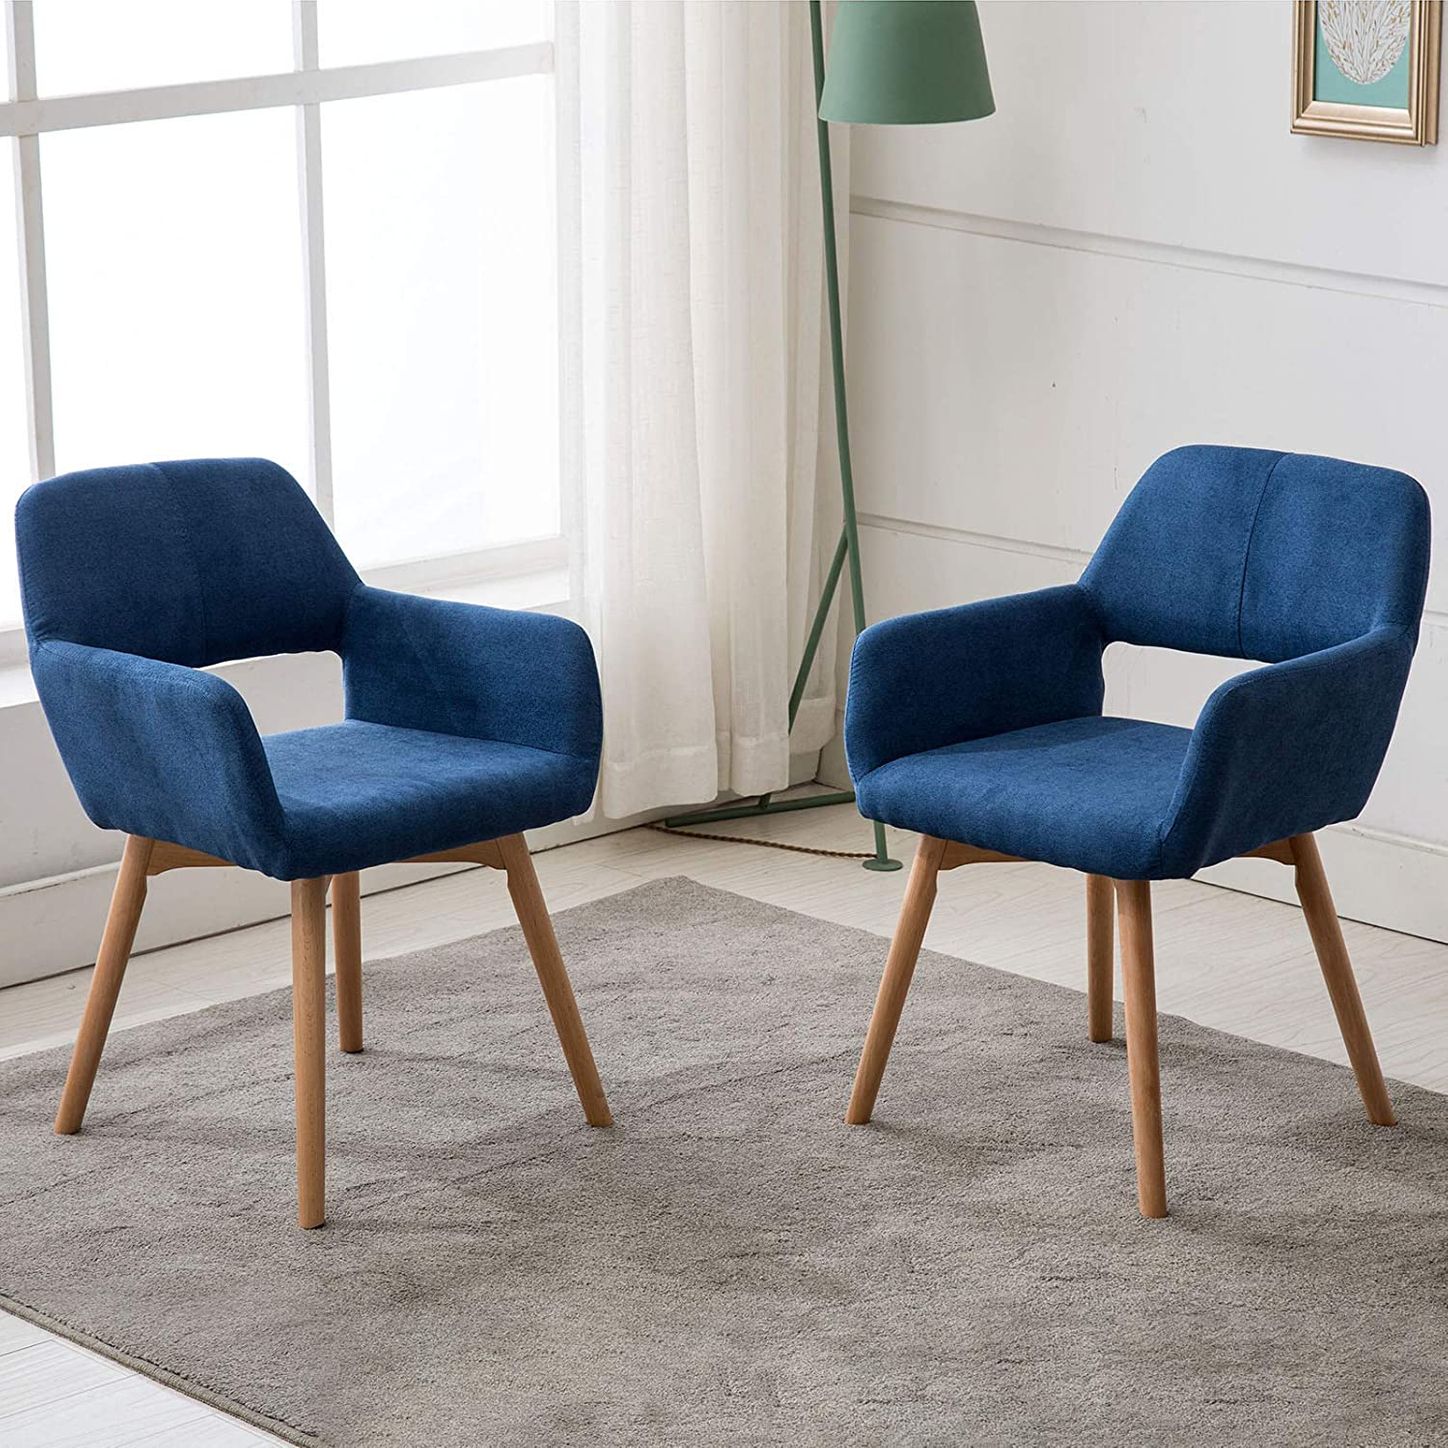 Chairs On 2021, Best Affordable Living Room Chairs